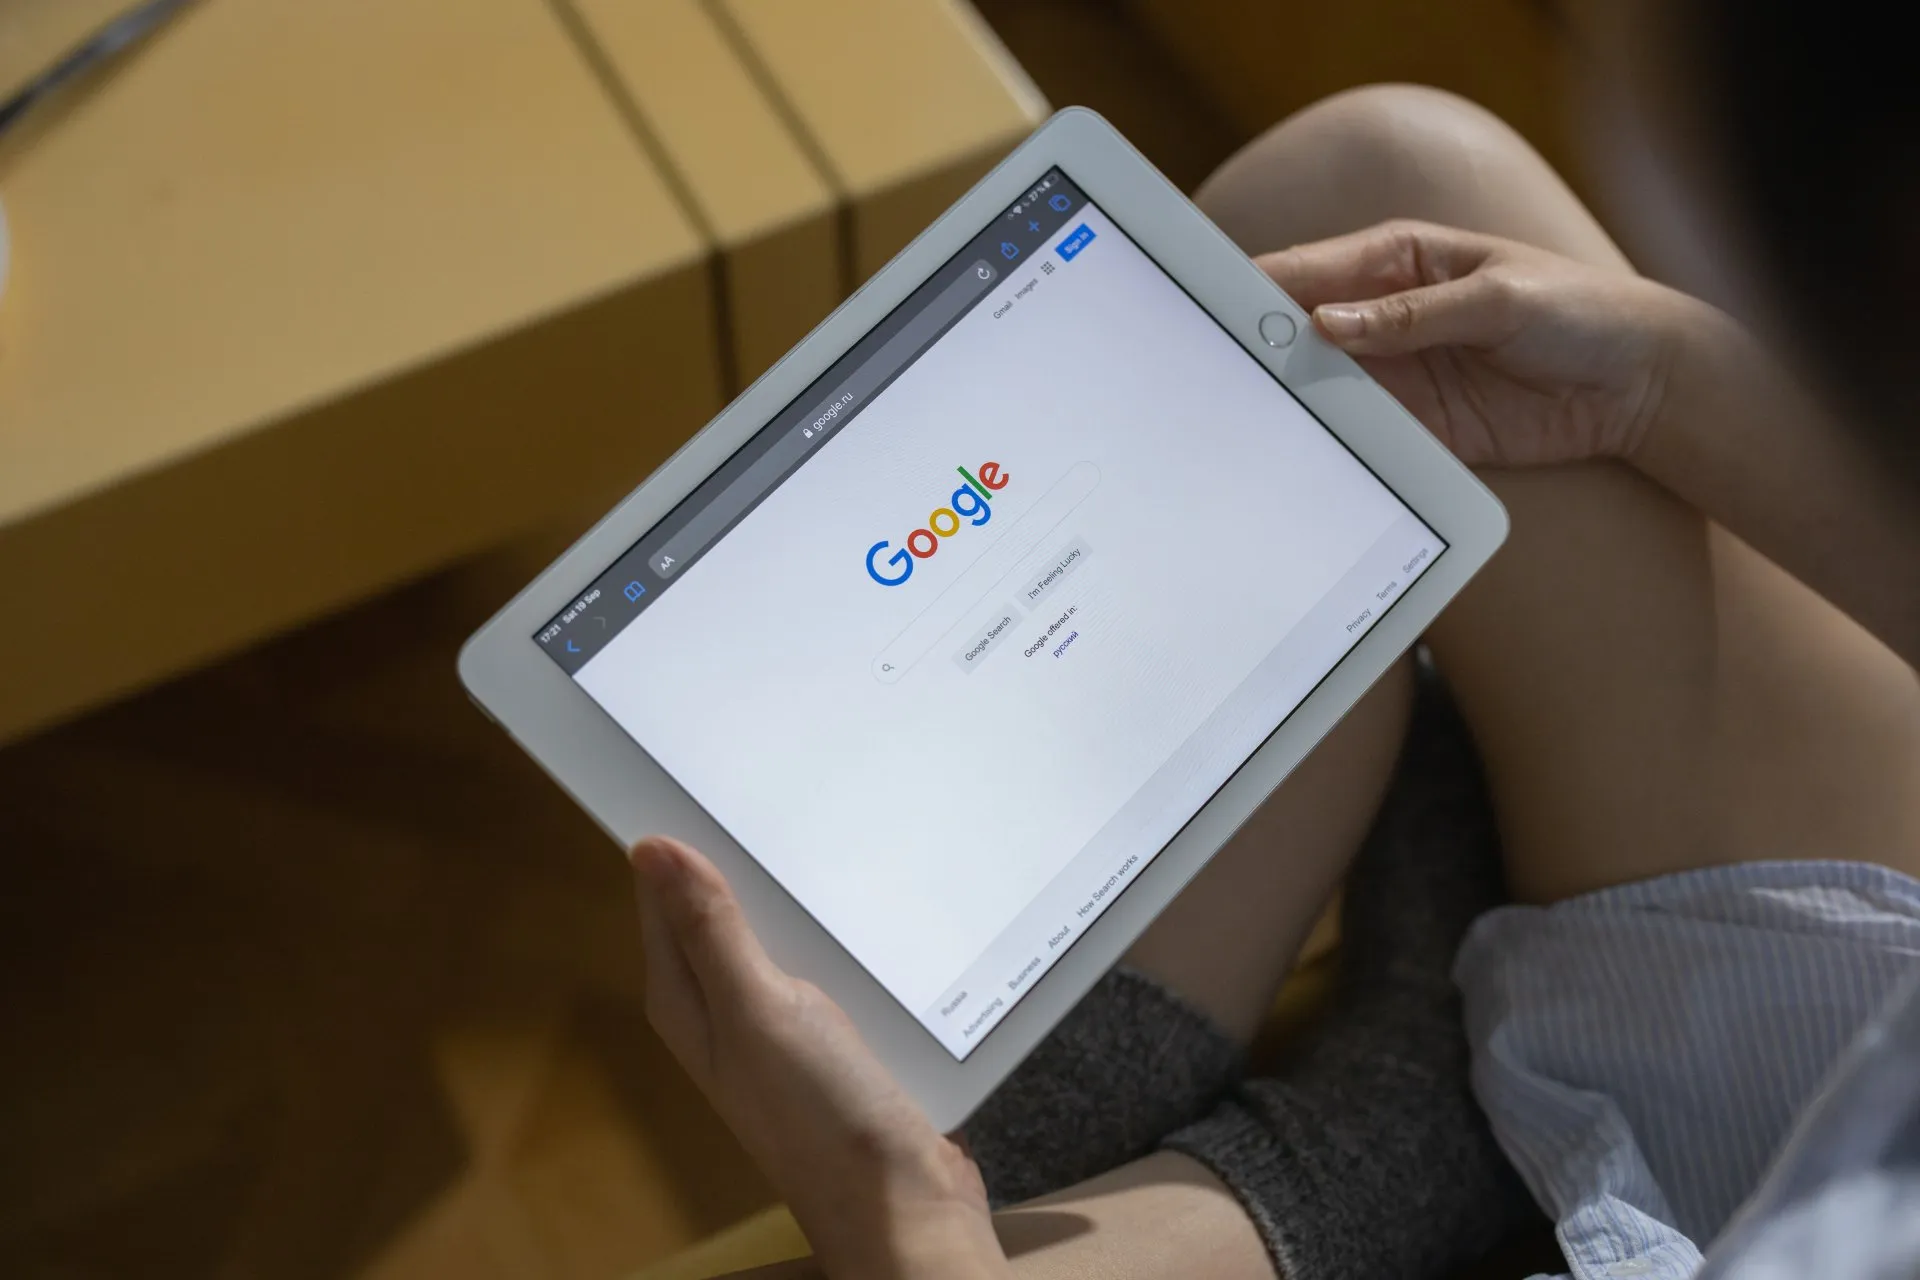 google page open in the tablet